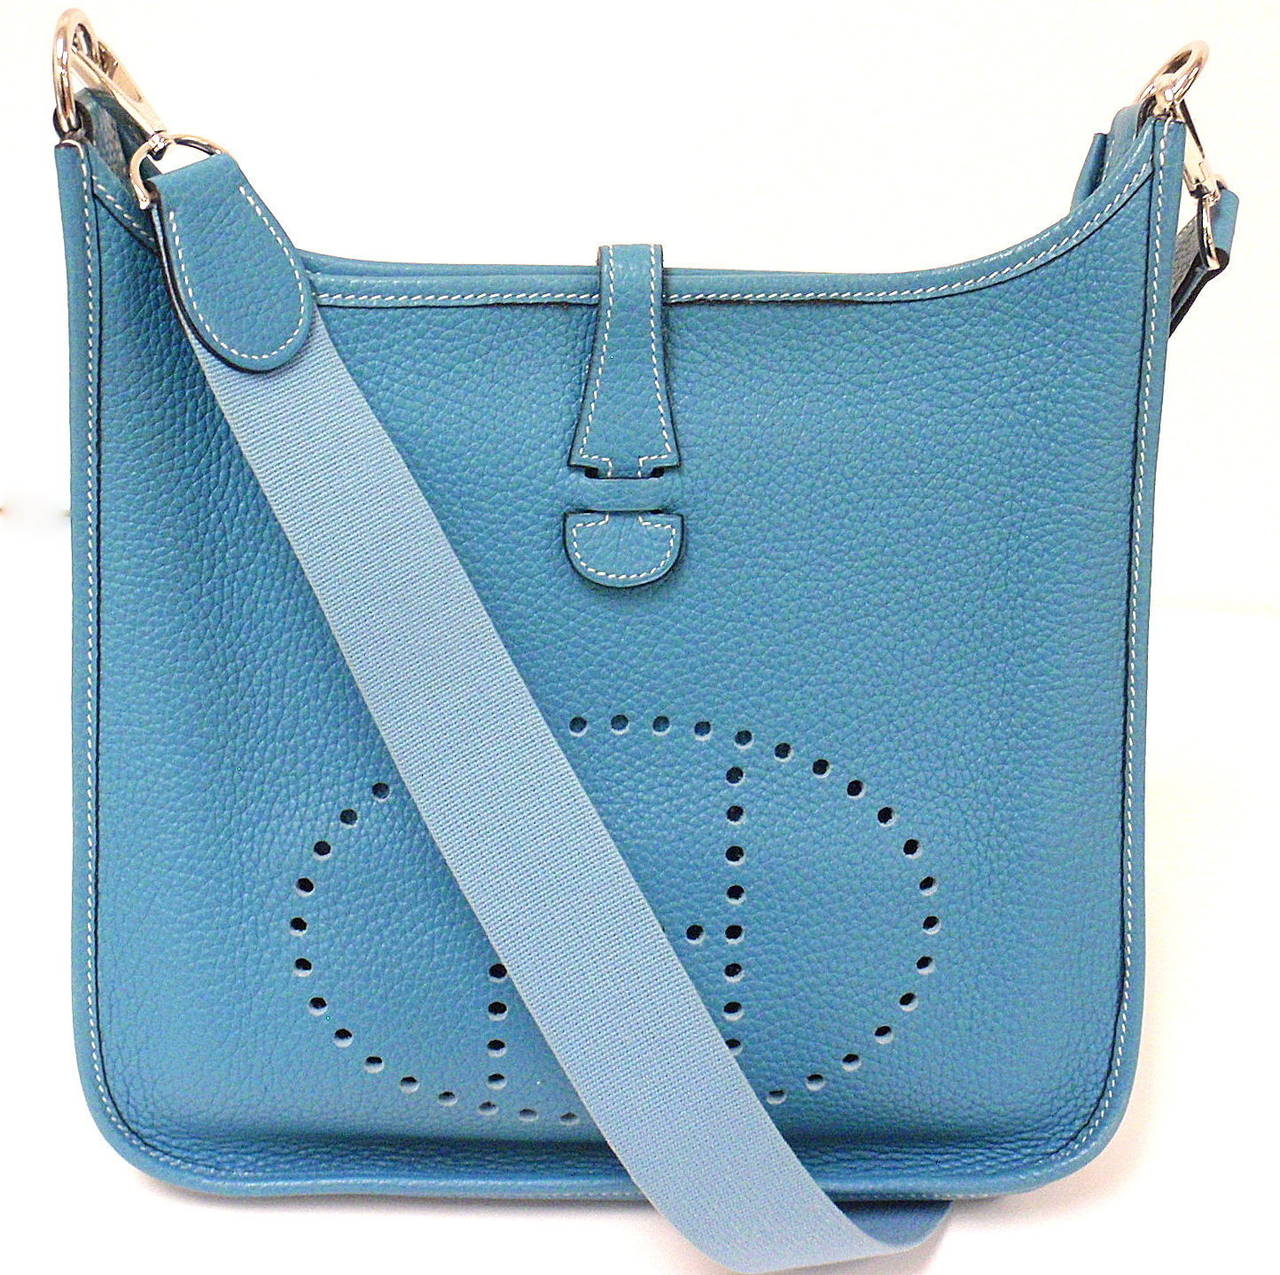 HERMES EVELYNE PM BLUE JEAN TOGO LEATHER GHW SHOULDER BAG, 2004
This bag is in GREAT MINT condition. Features thick soft togo leather exterior with sueded leather interior. 
Color will vary from monitor to monitor.
Exterior: Minty.

Strap is